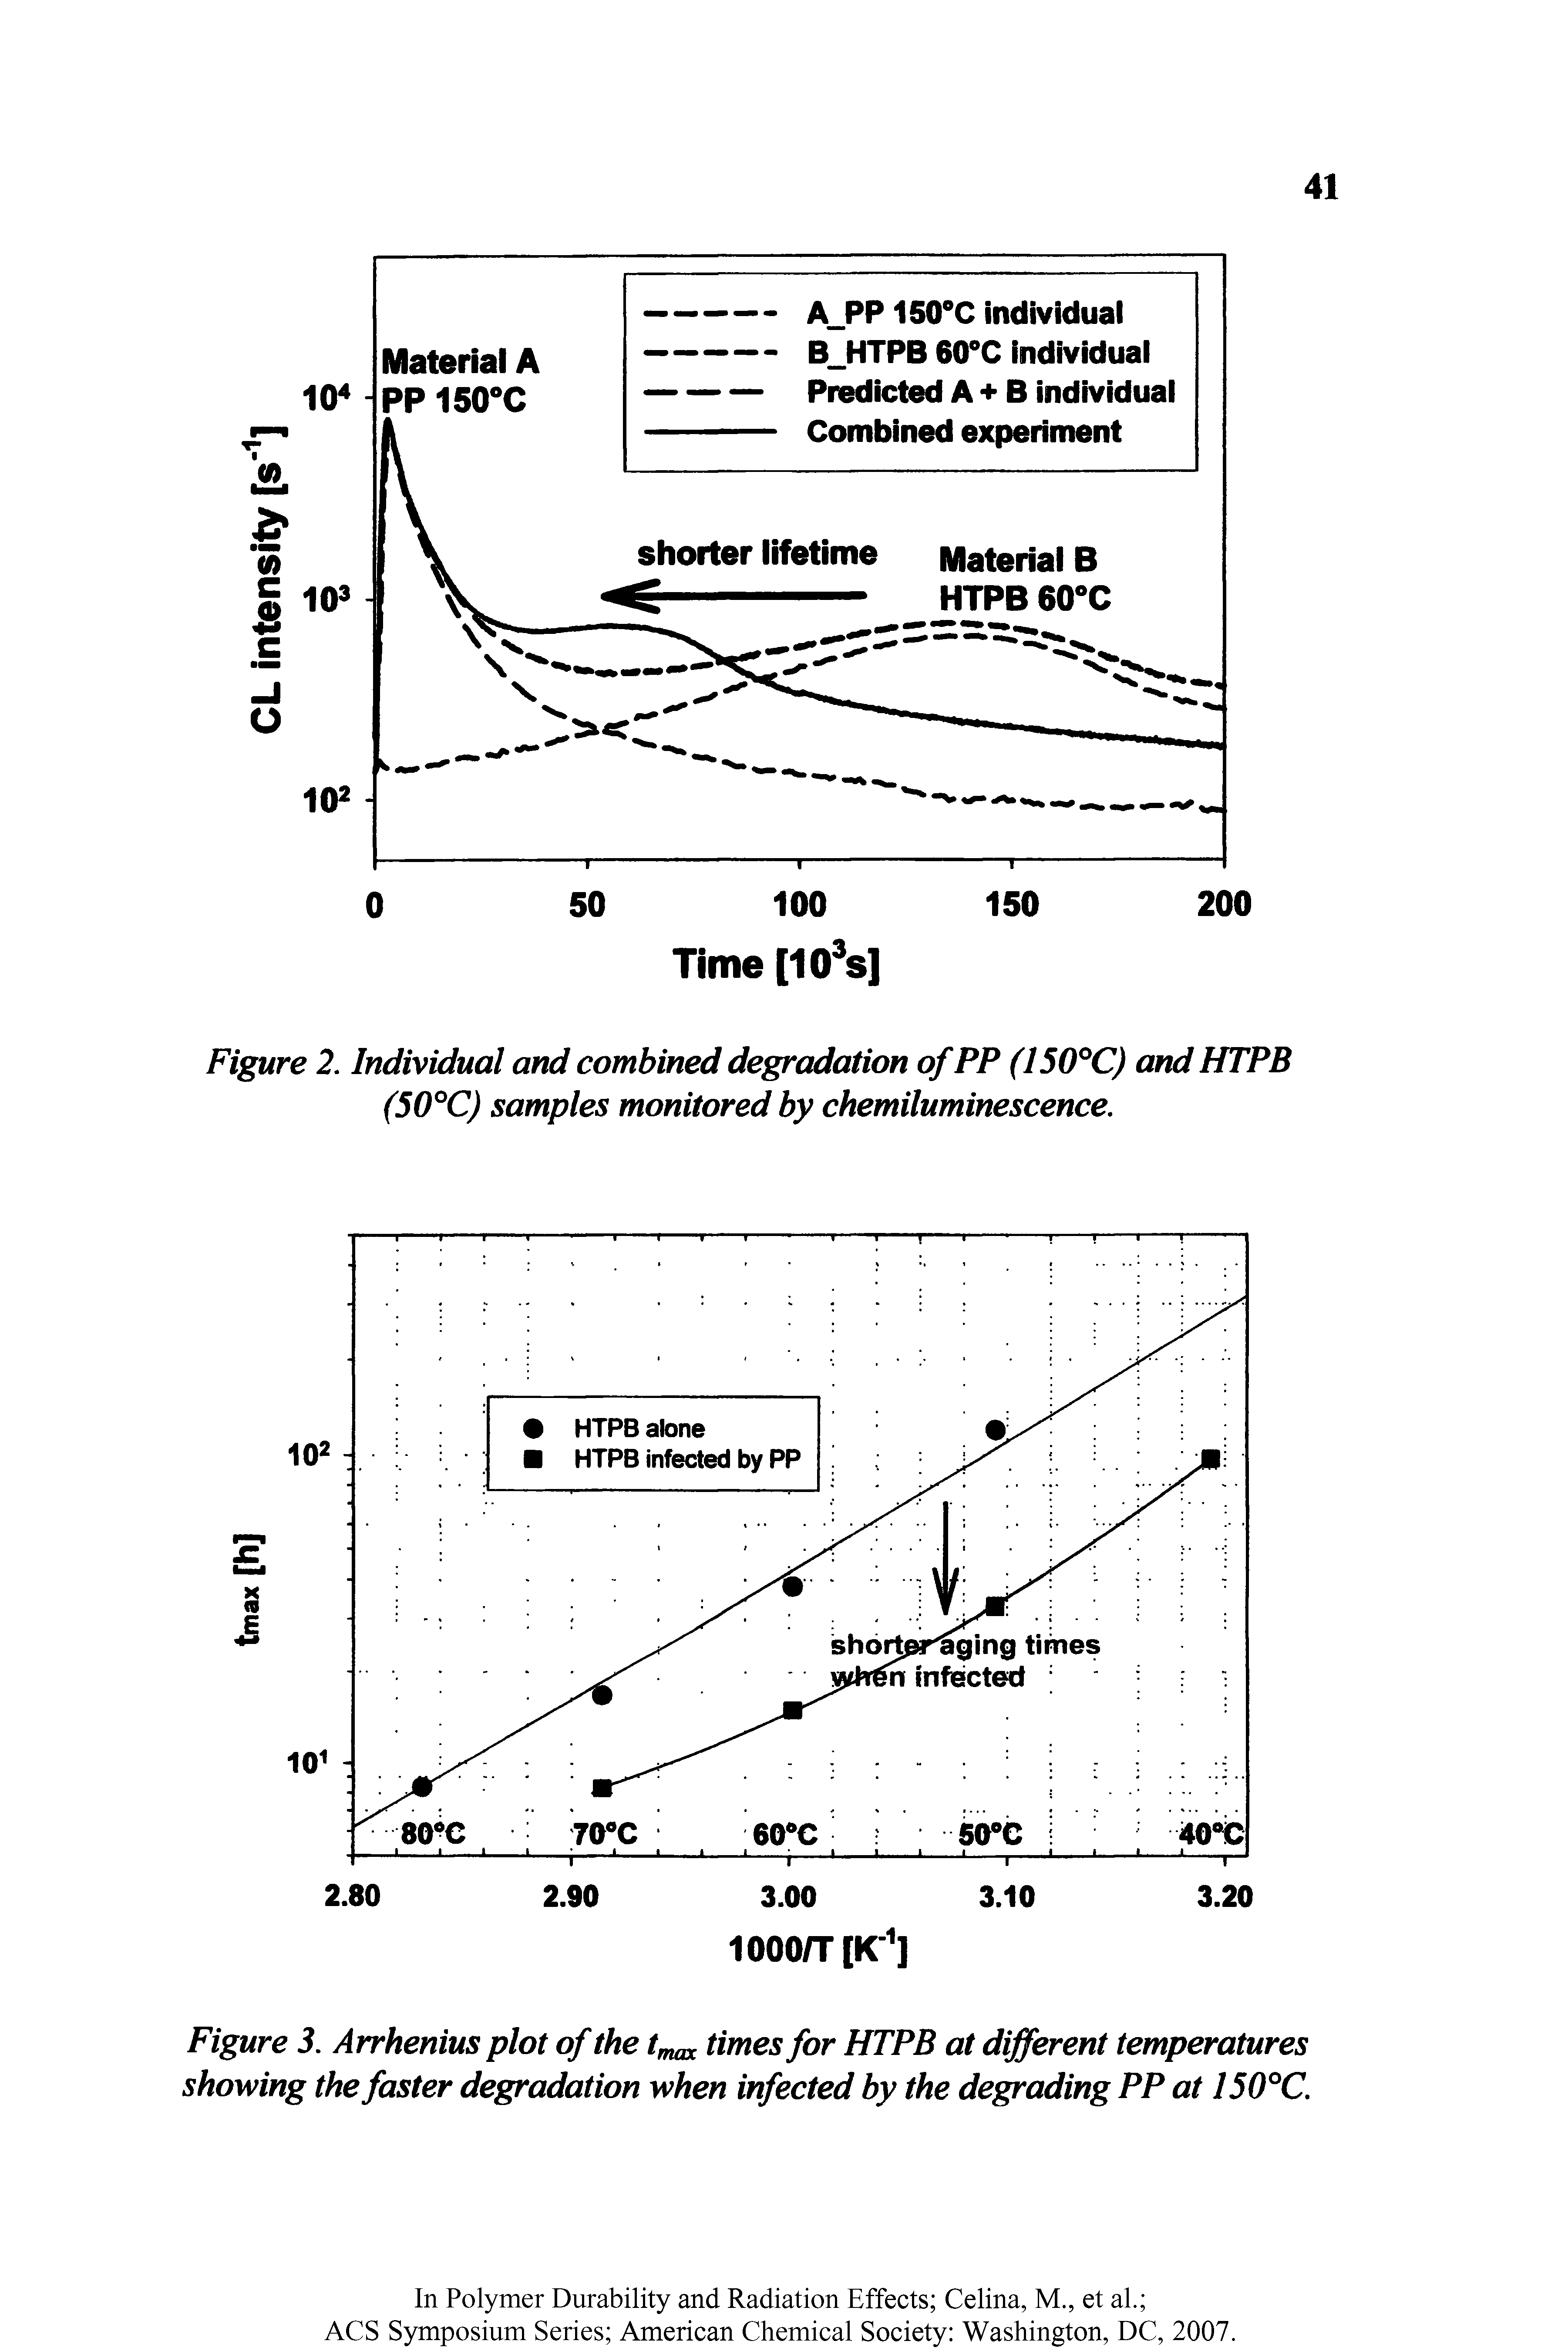 Figure 3. Arrhenius plot of the tmax times for HTPB at different temperatures showing the faster degradation when infected by the degrading PP at 150°C.